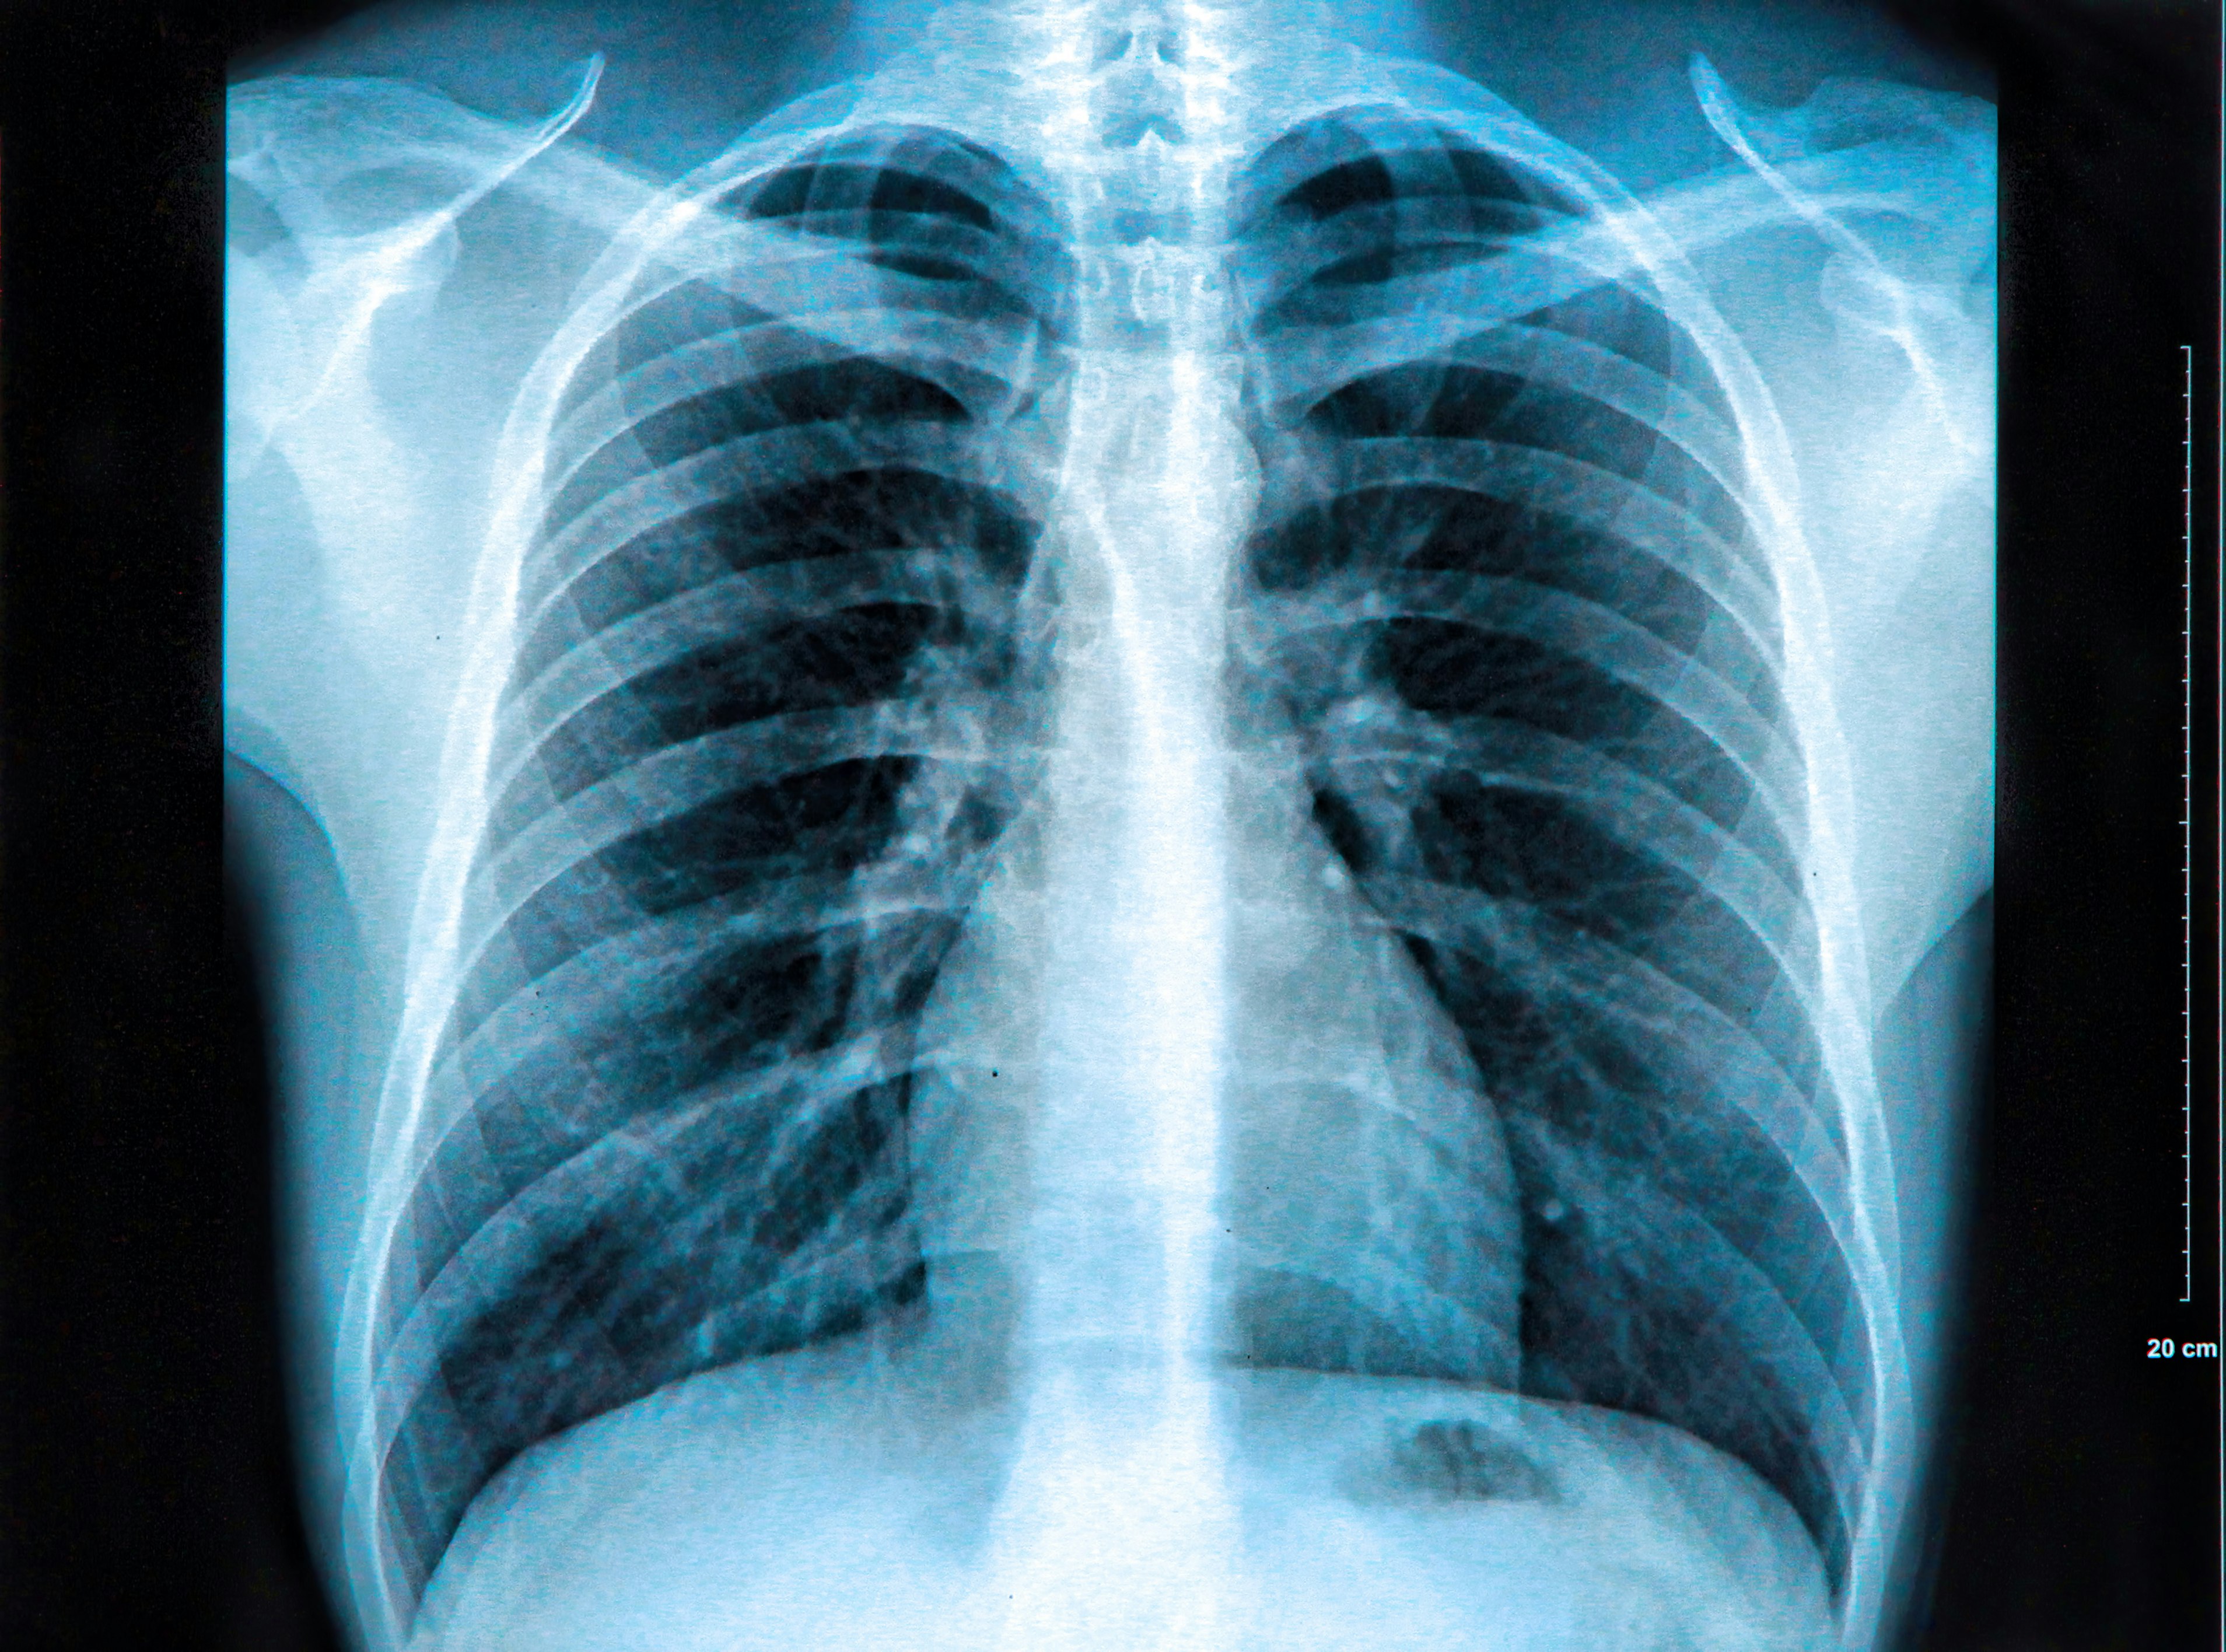 The Science Behind X-Ray Imaging